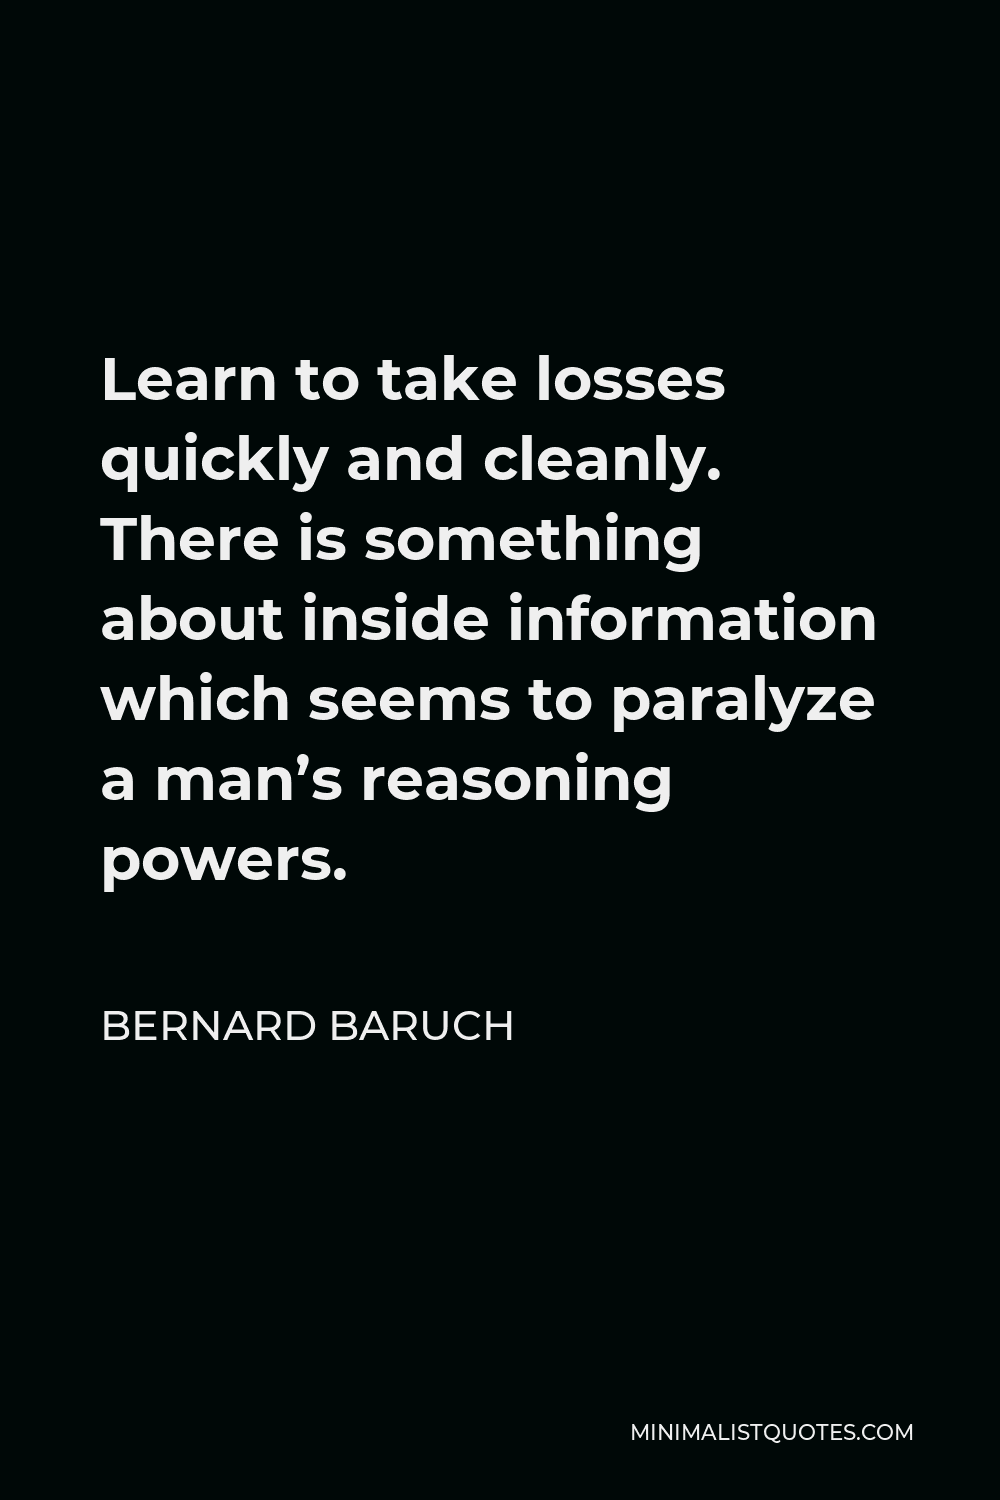 Bernard Baruch Quote - Learn to take losses quickly and cleanly. There is something about inside information which seems to paralyze a man’s reasoning powers.